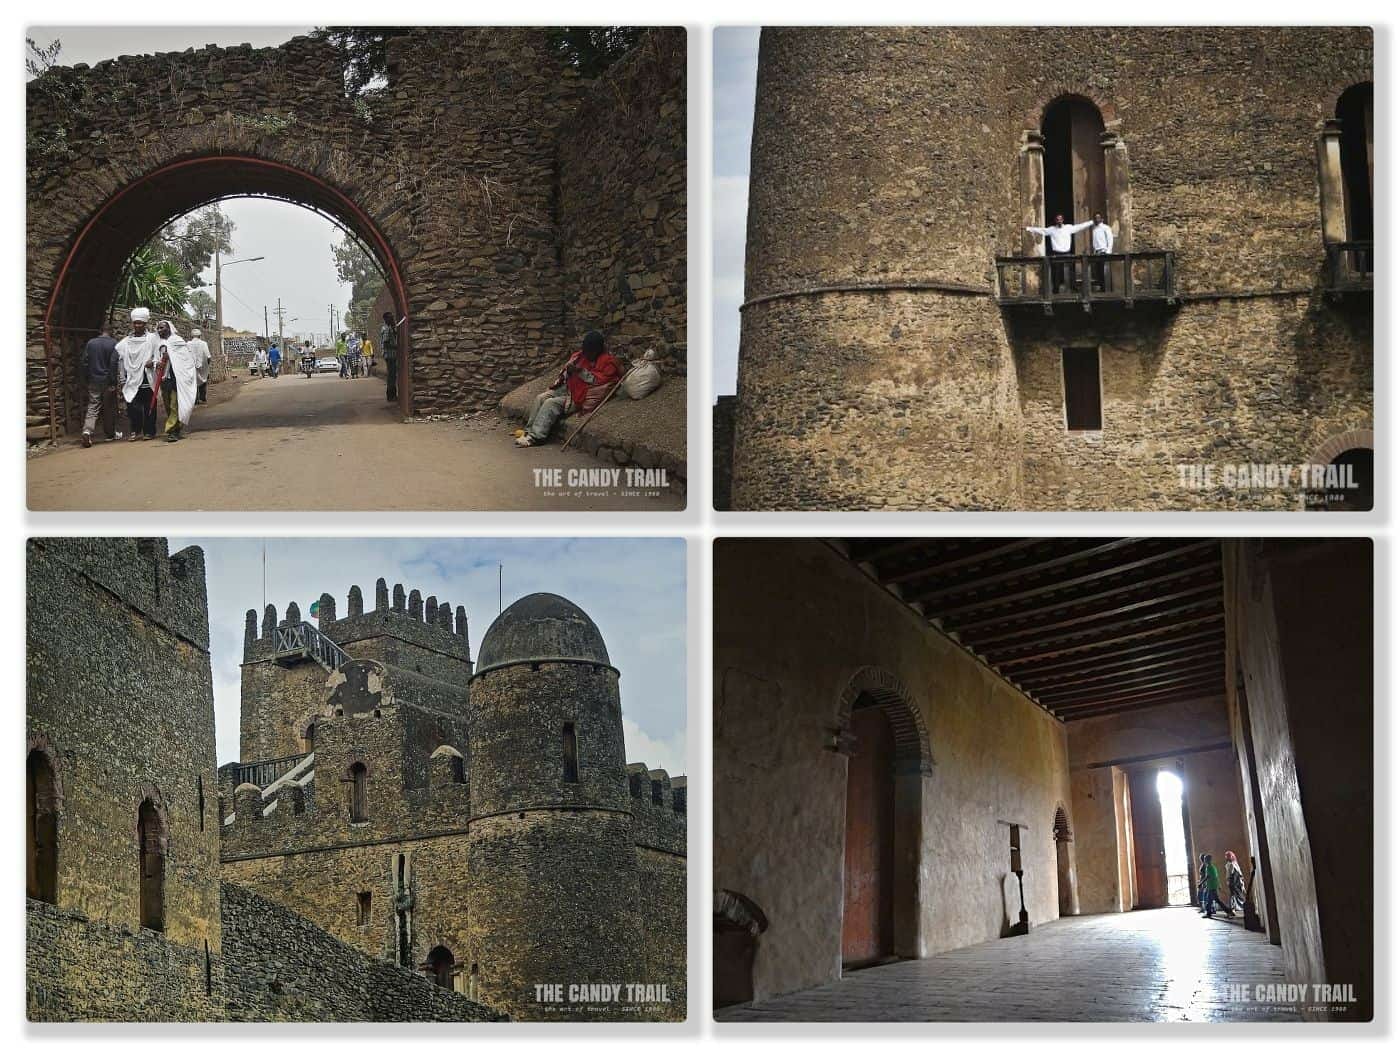 Images of Castles in the Royal enclosure at Gondar's World Heritage Site in Ethiopia.